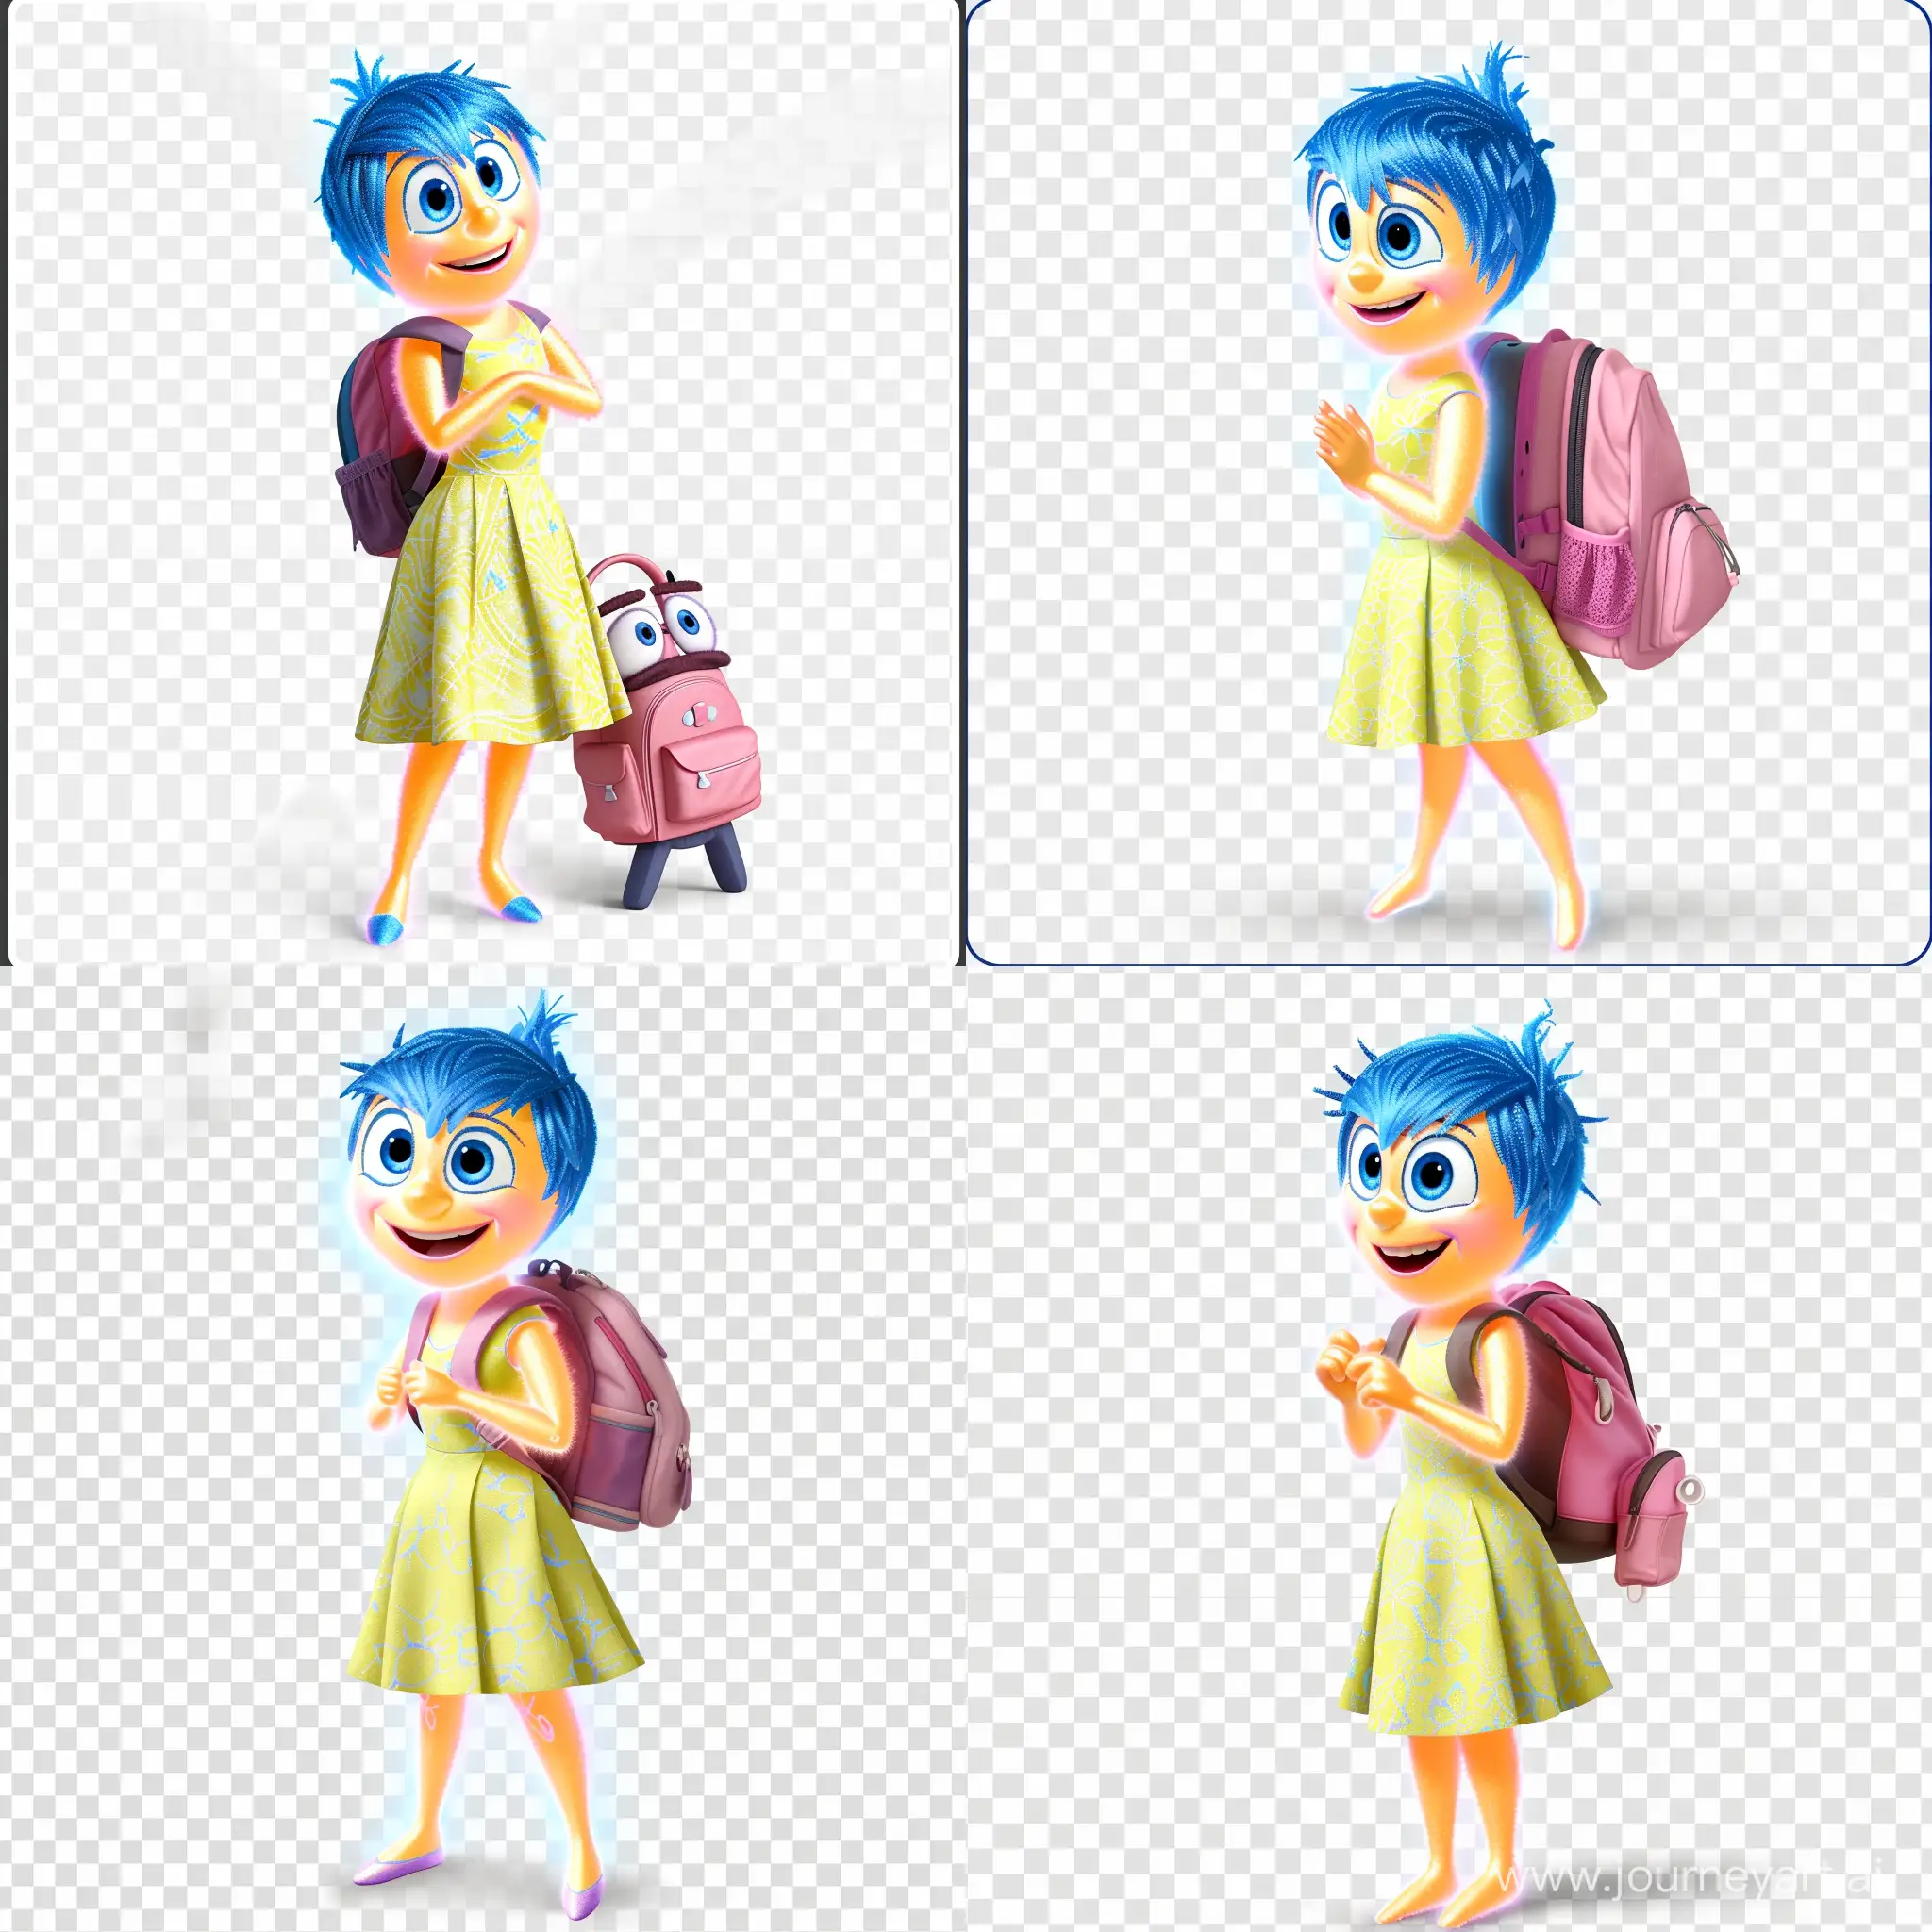 I want to create an image of the character Joy from the film Inside Out, with blue hair, the dress she wears when promoting the film, her smiling, with a pink school backpack. The image must have a transparent background and the character must be centered in the image, without any cuts to the objects in the image.